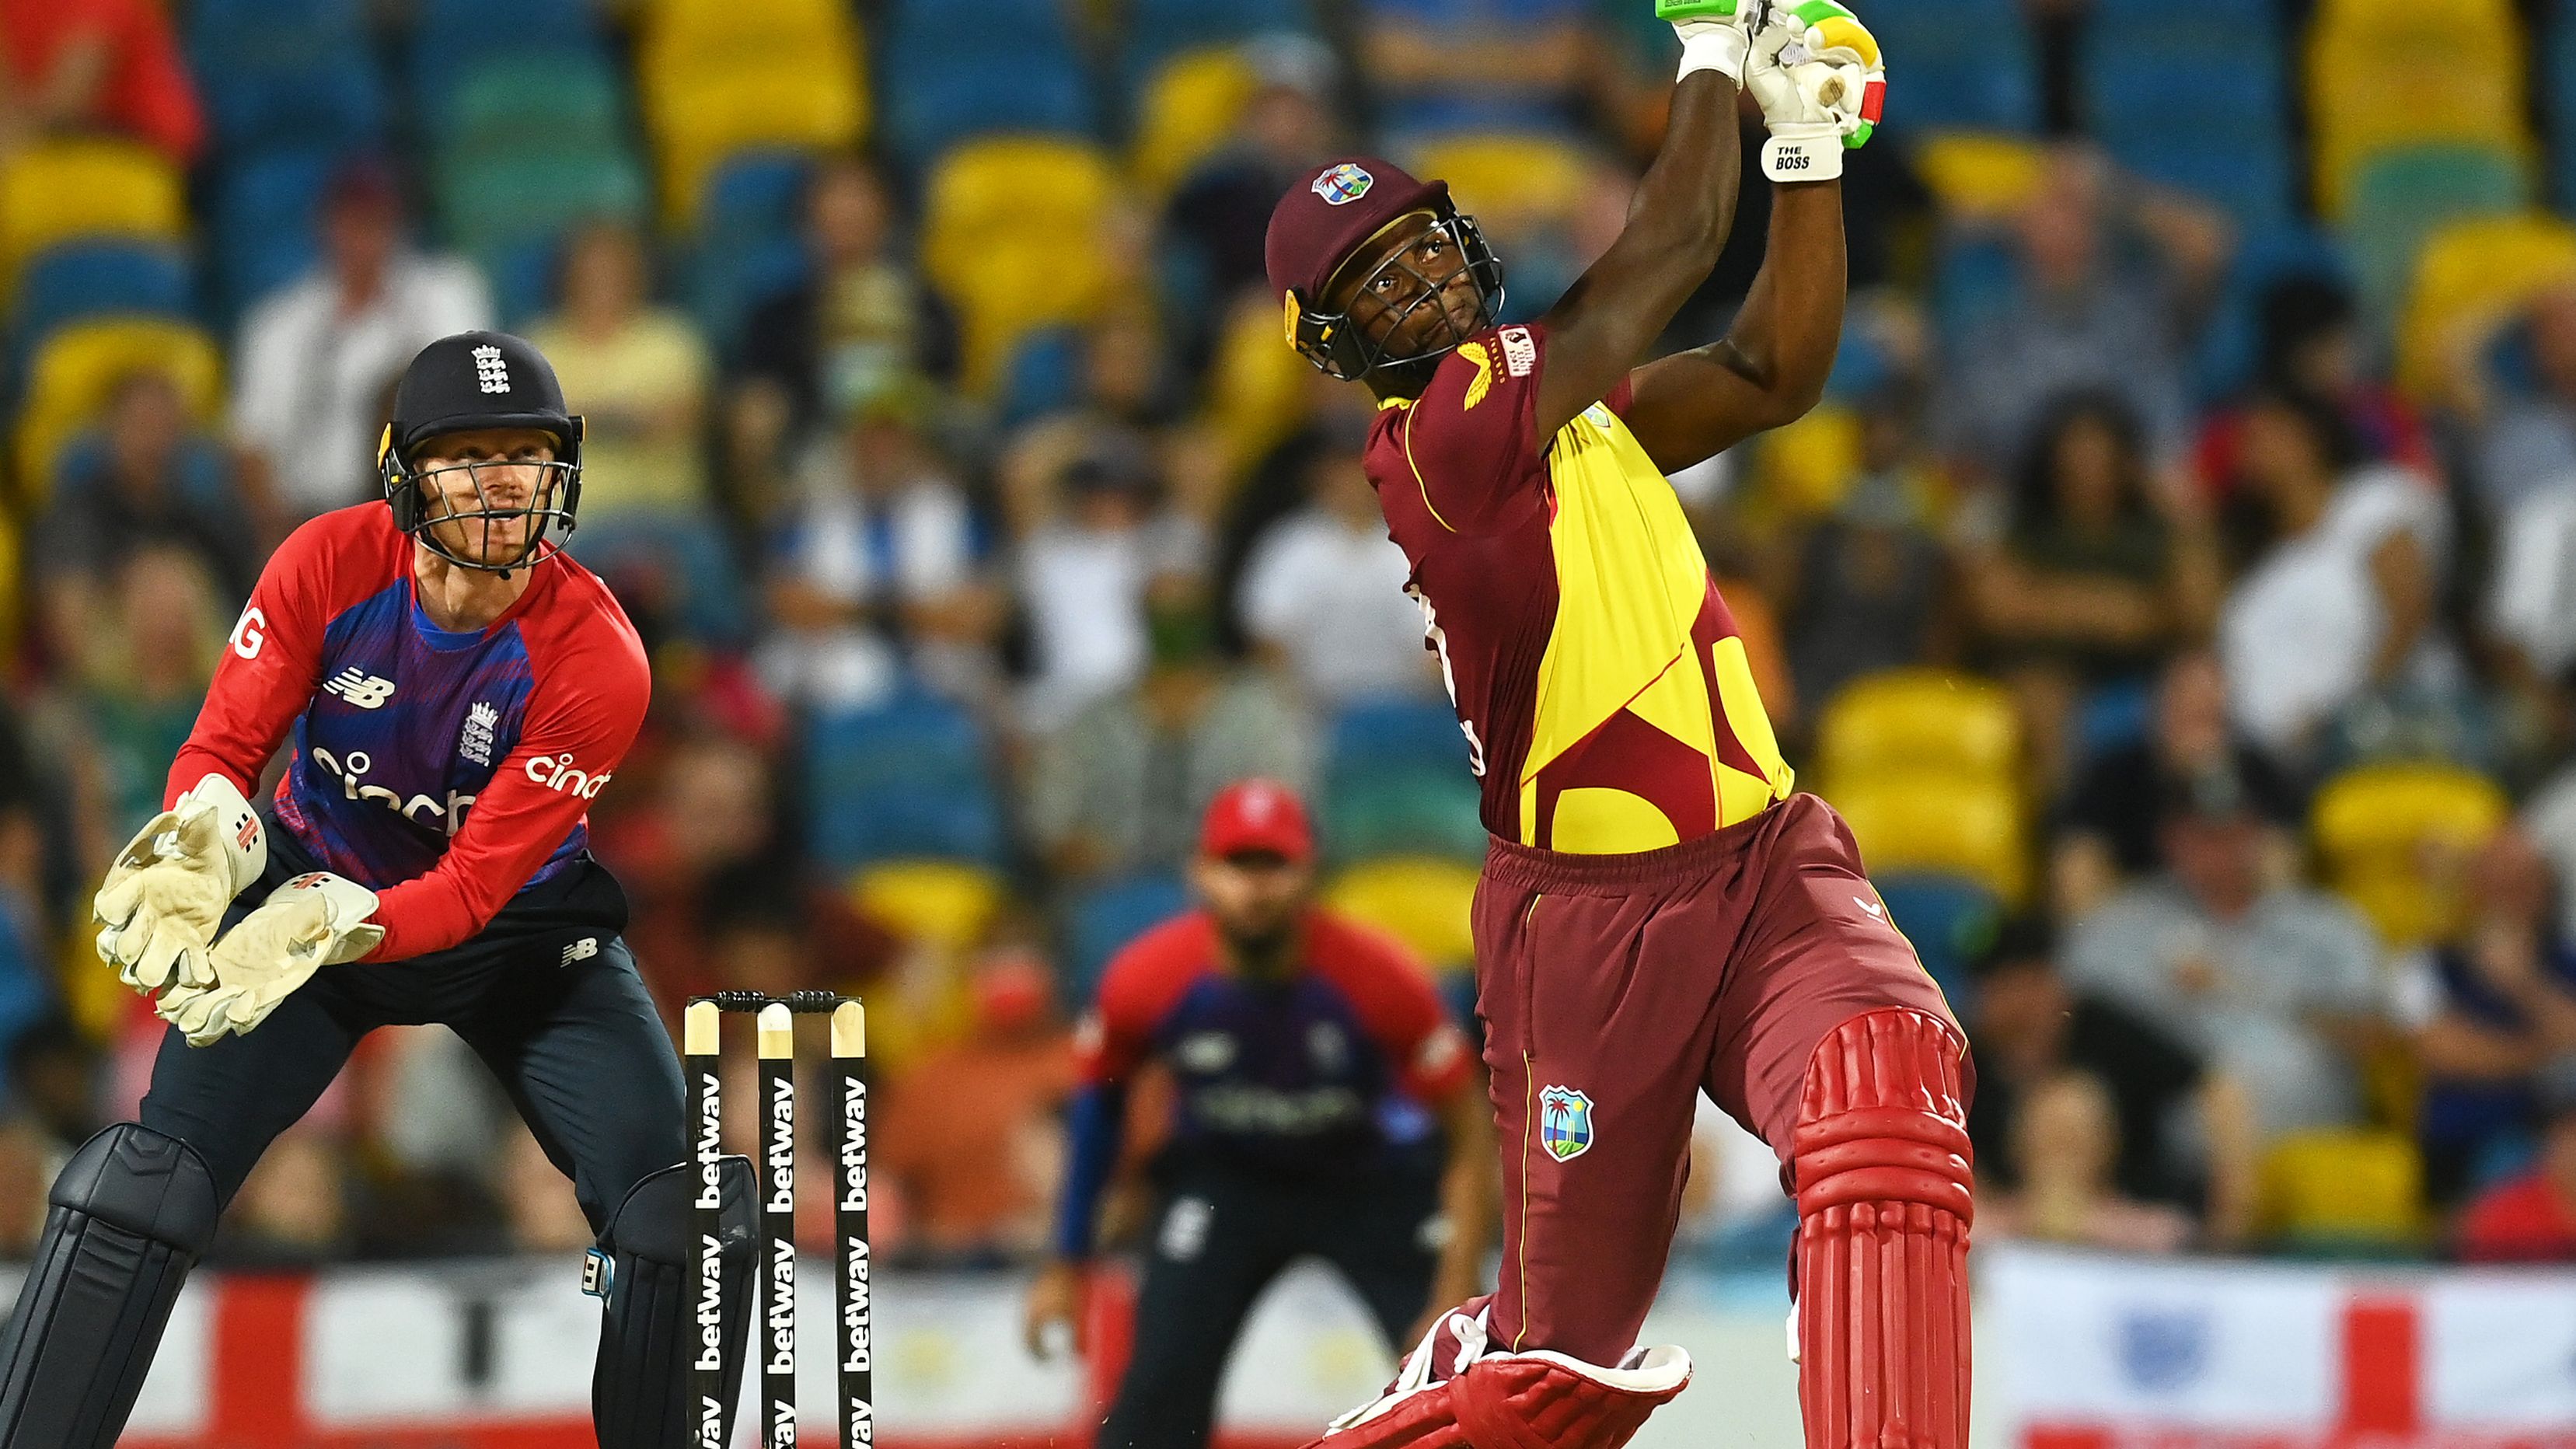 West Indies tailenders set insane cricket record but fall short in thrilling finish against England